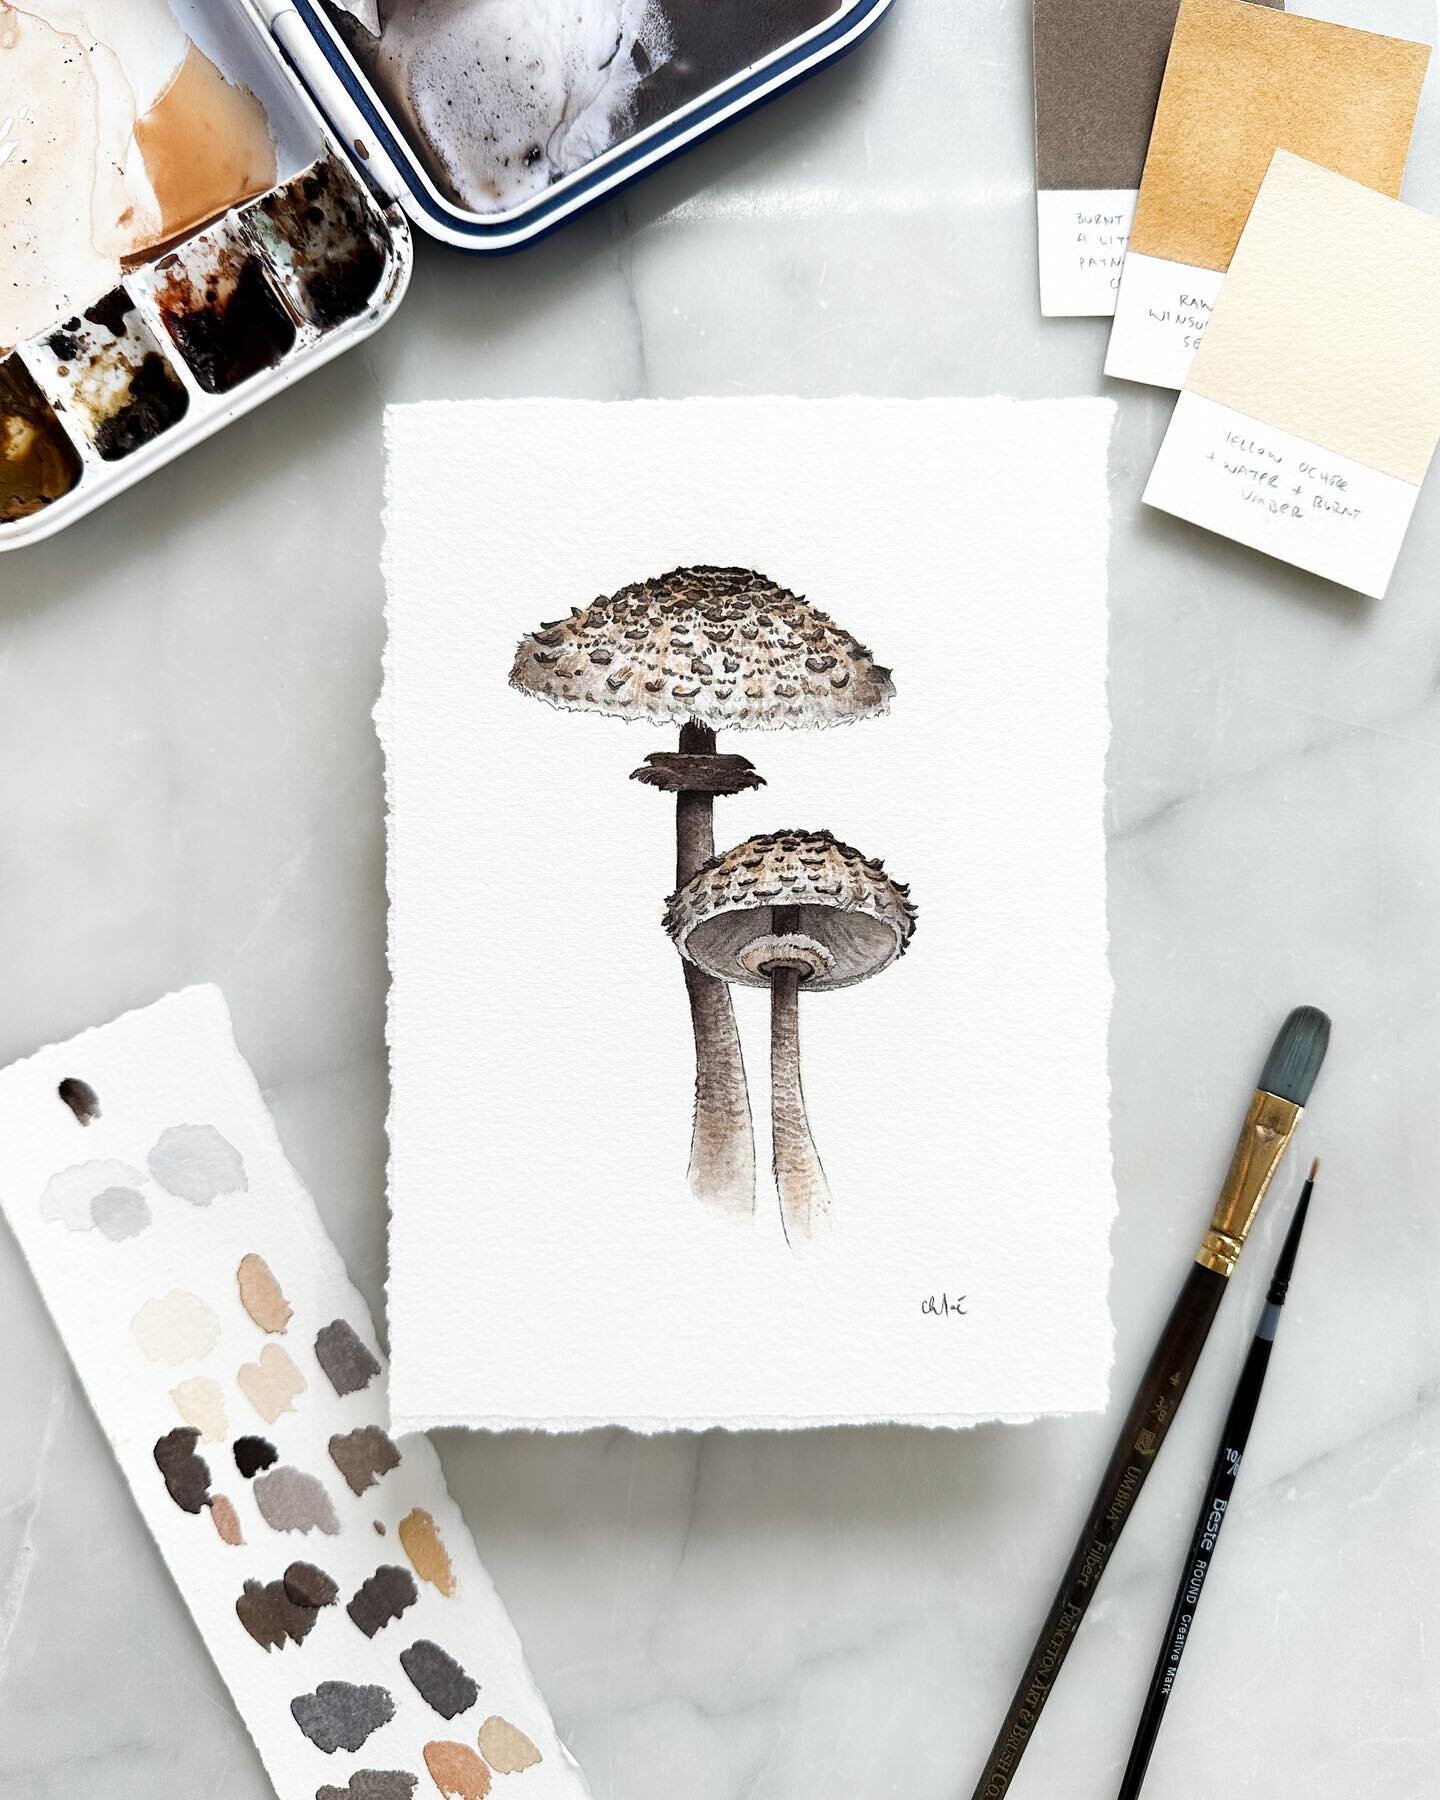 Rounding out my new mushroom series with this pair! These are parasol mushrooms, they are edible and can grow to be quite large.

All three new mushroom original paintings are available as well as $10 mini prints of each.

Link in bio!

What mushroom